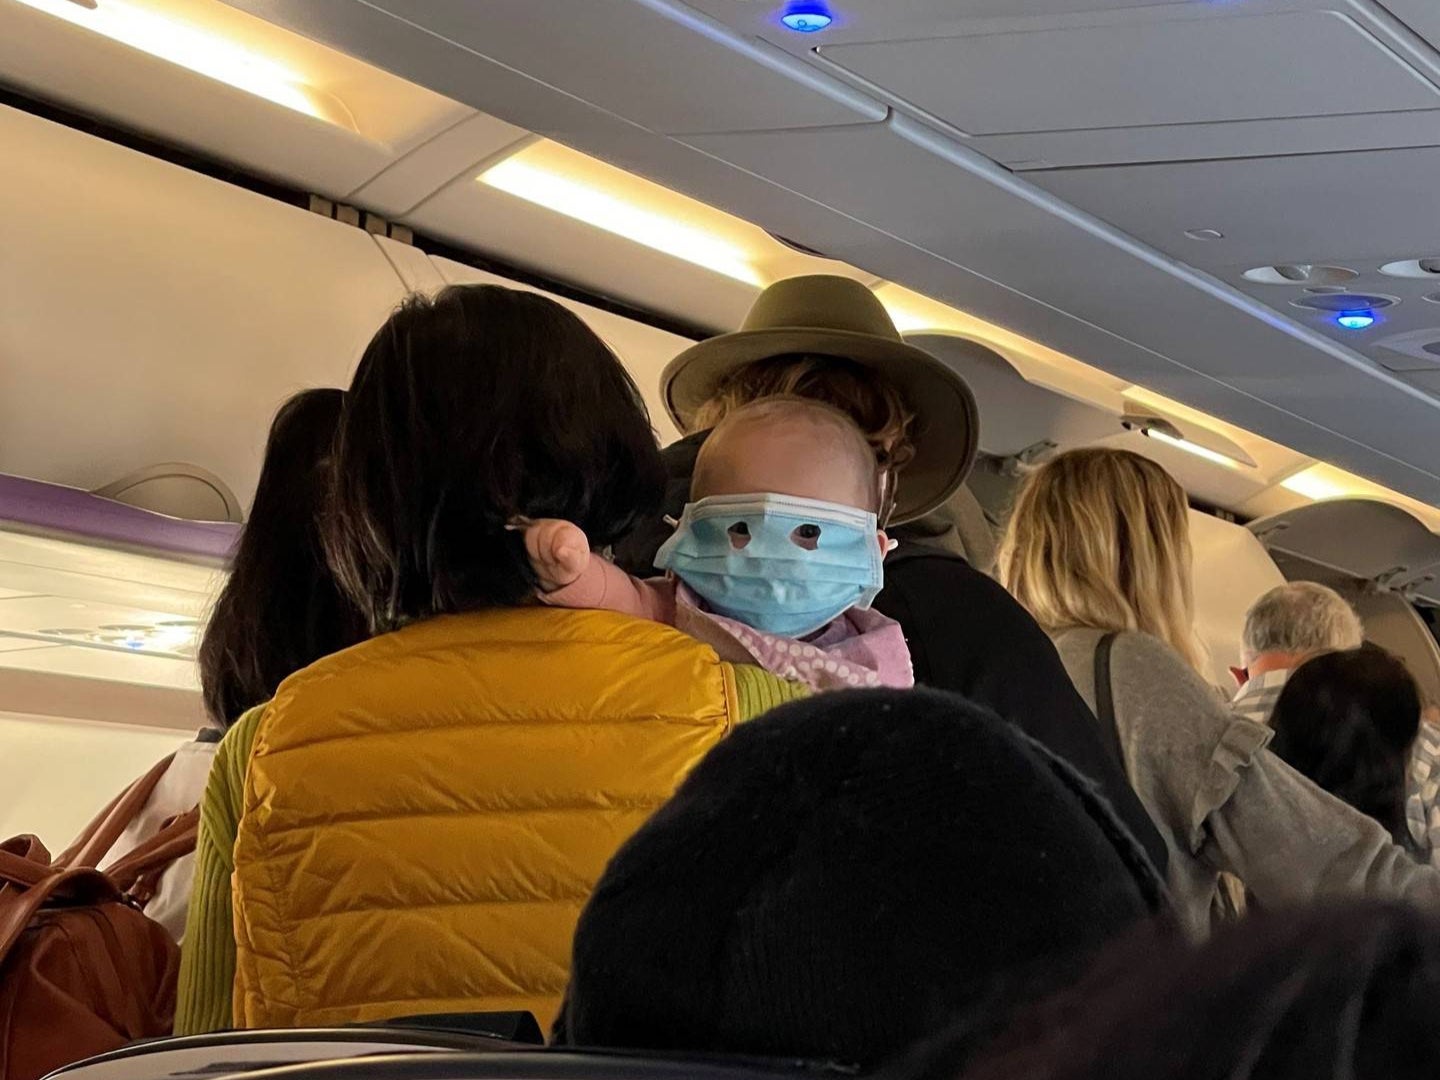 The infant could be seen looking through the make-shift eye holes of is face mask